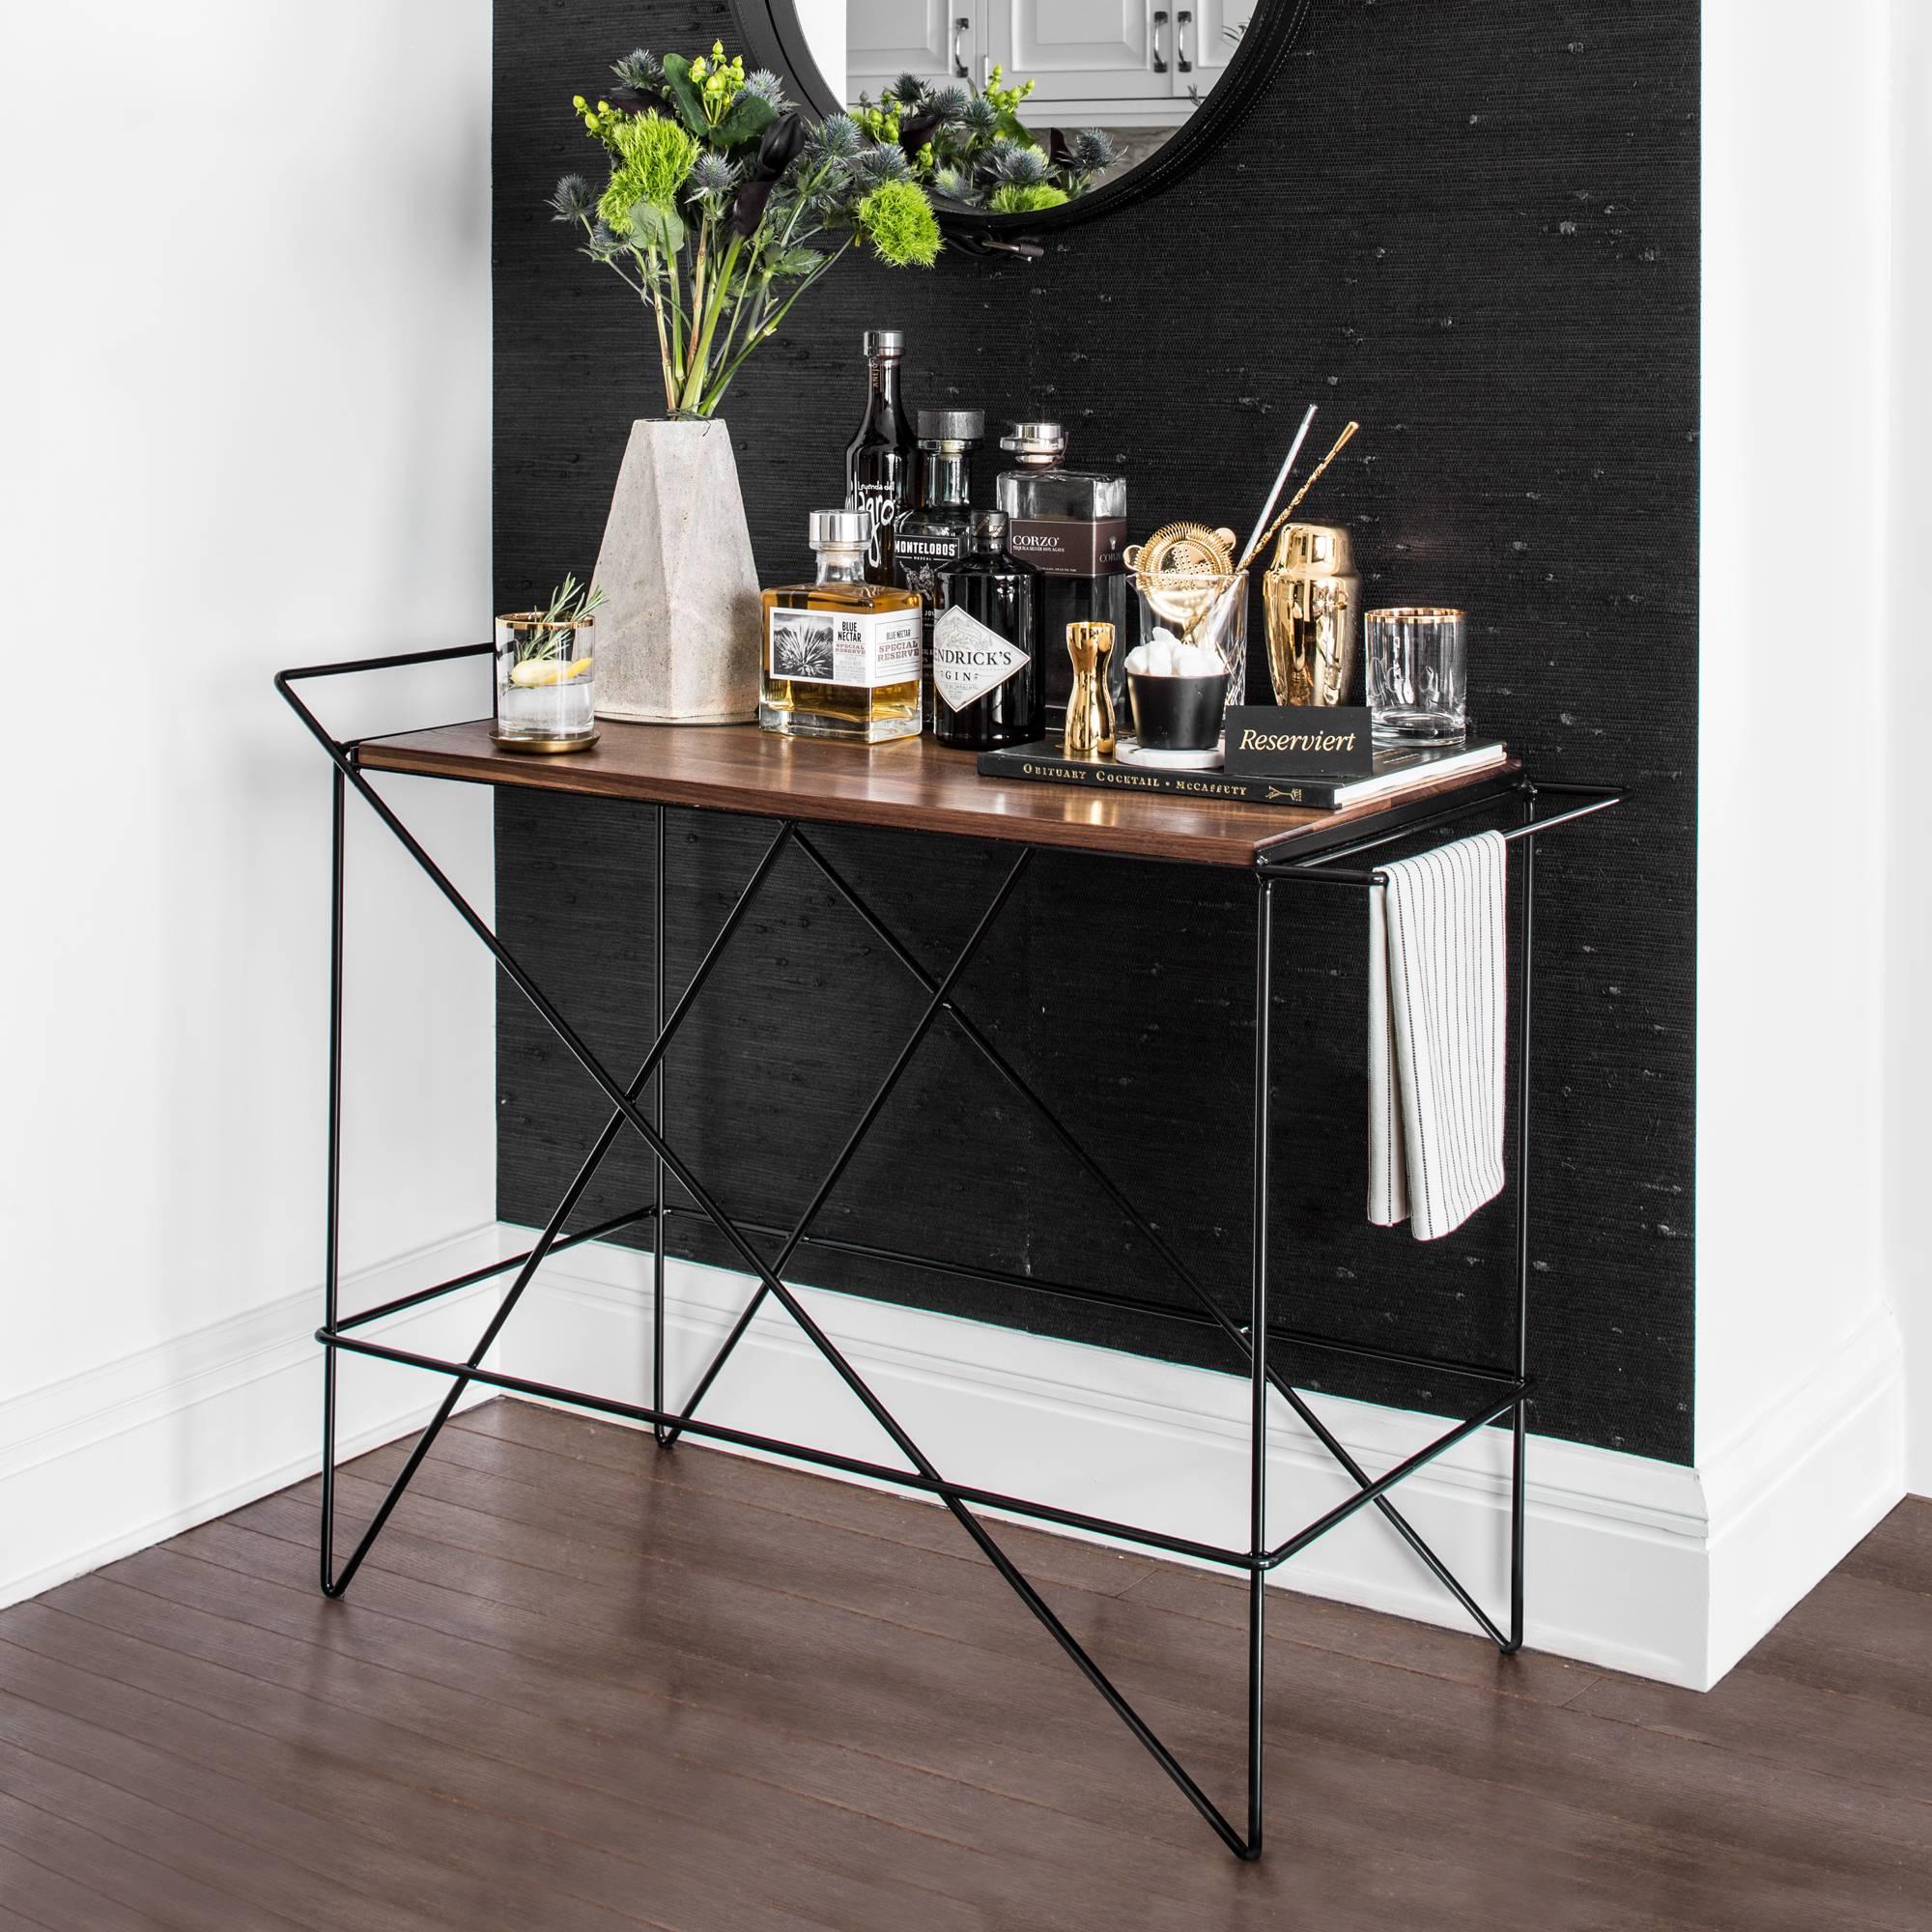 Day to day most bar carts aren't being rolled around, so The Coleman bar cart was designed to be a beautiful presentation and conversation piece while still light enough to remain functionally mobile. It is the result of a commission from Basil